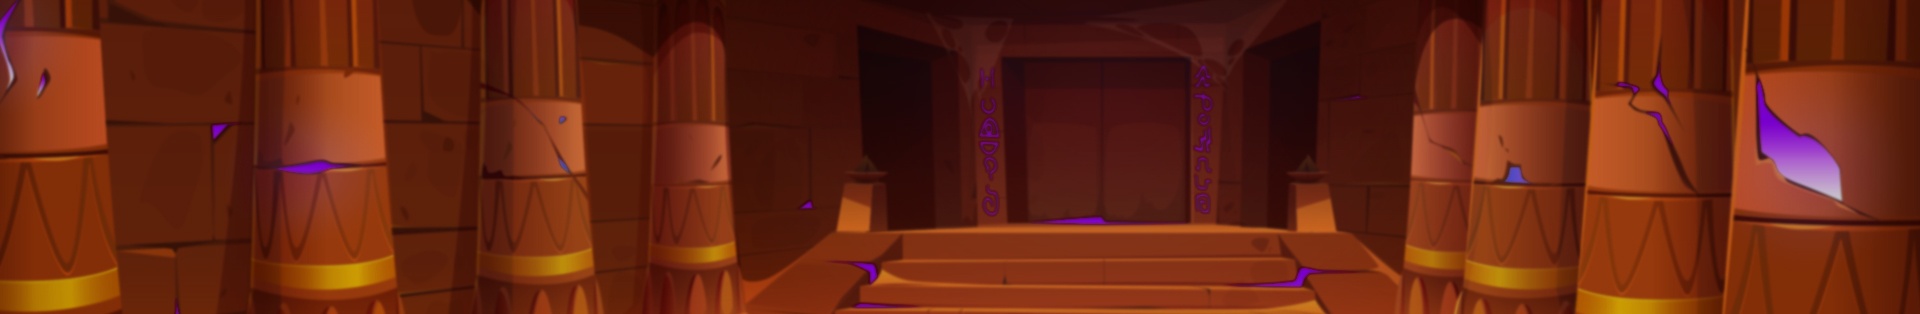  A mystical hallway with purple glowing runes and golden accents